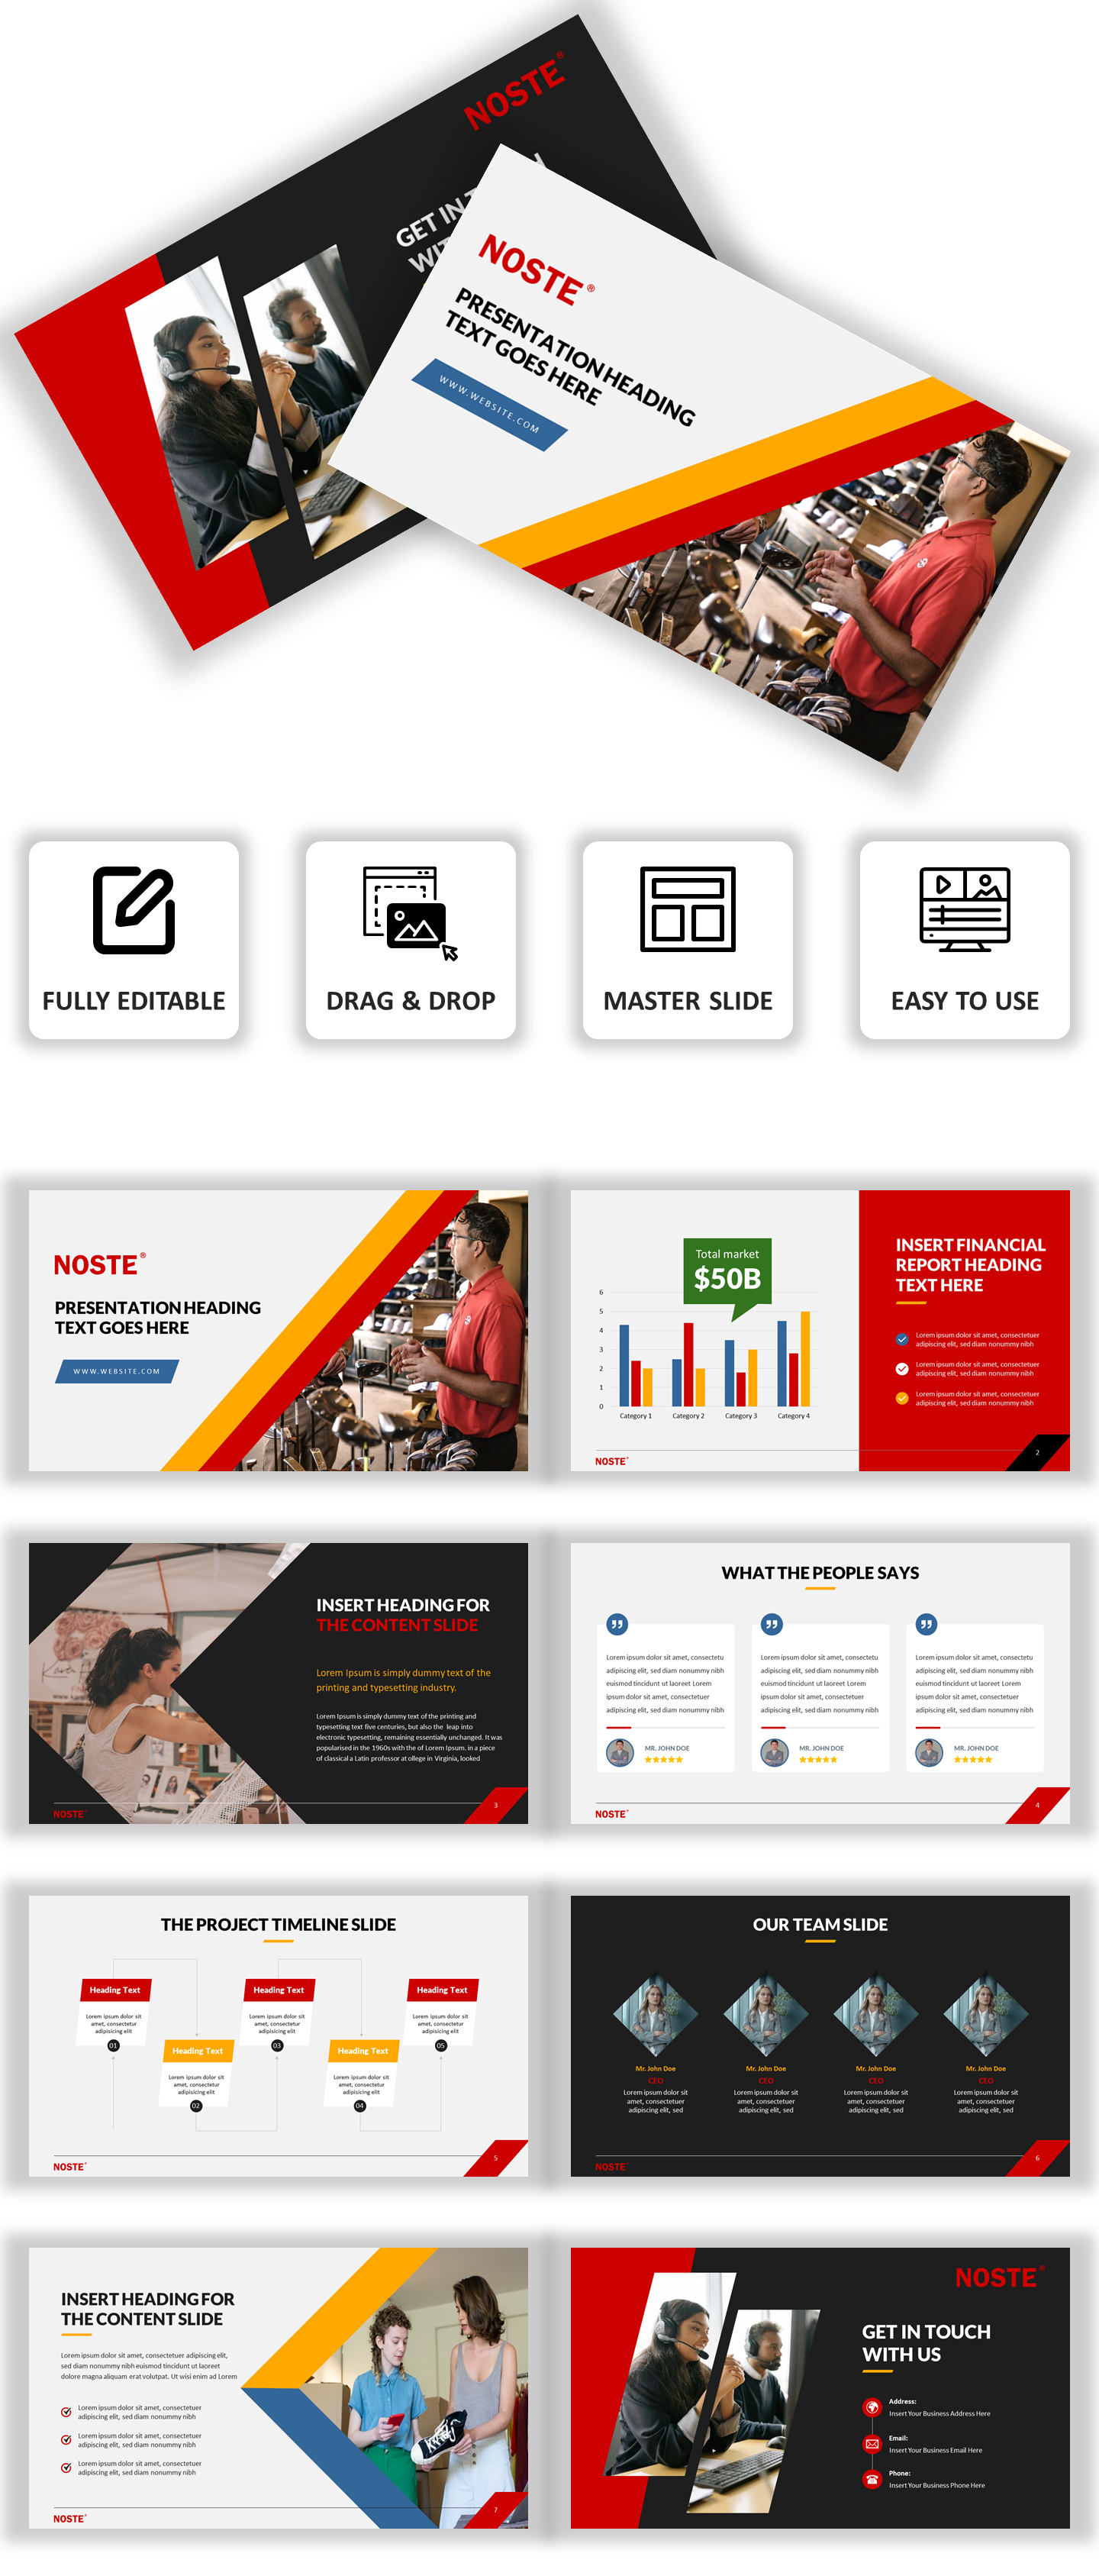 PowerPoint template for a consulting firm for sellers and buyers